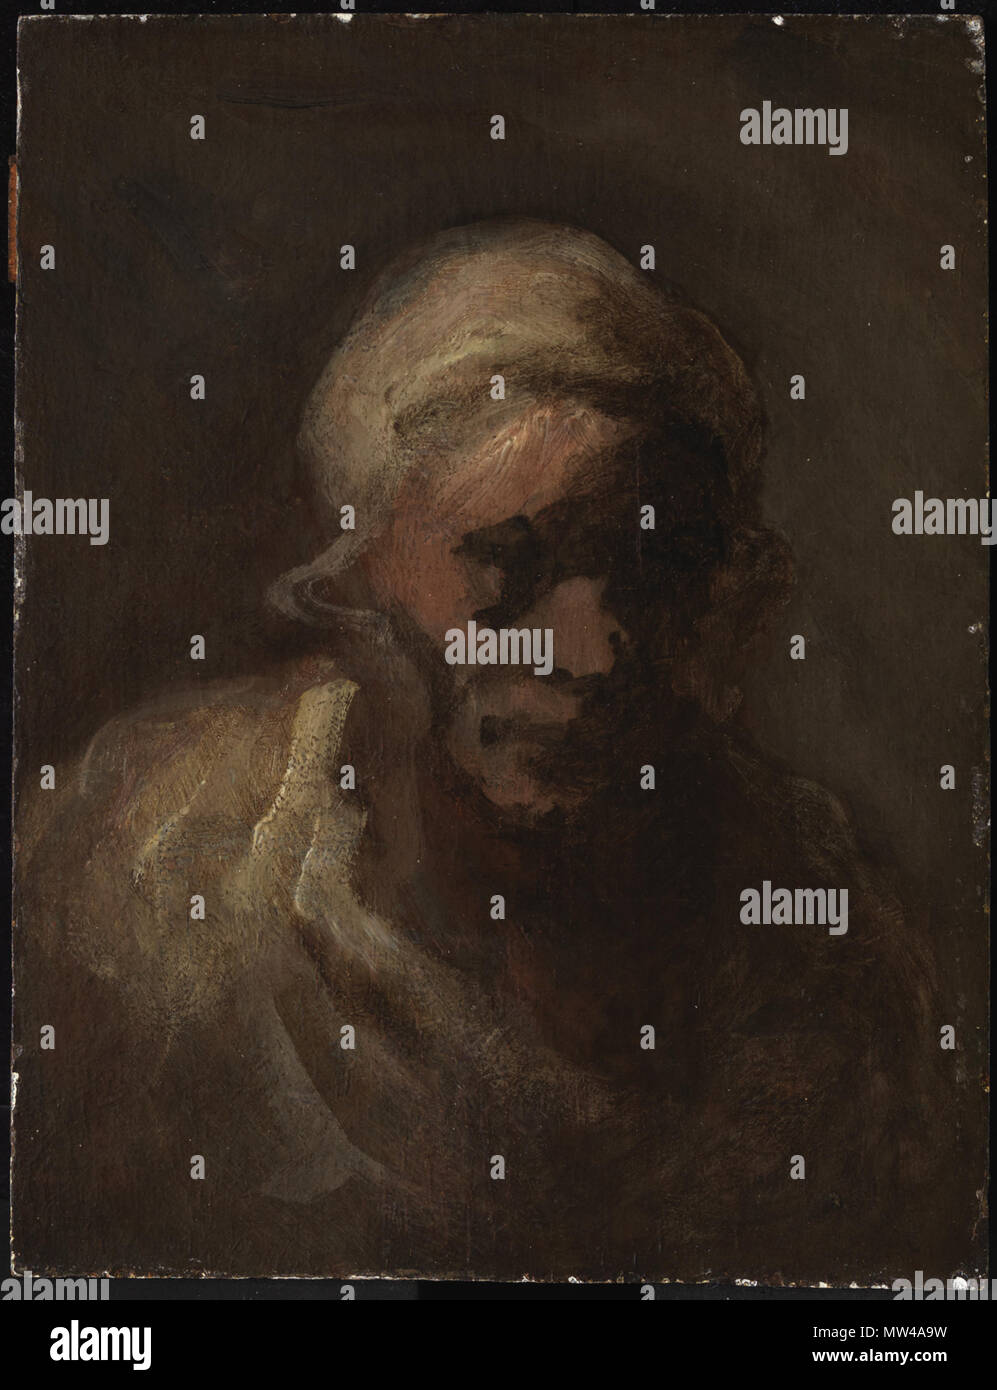 .  English: Honoré Daumier, French, 1808–1879 Head of an Old Woman, ca. 1856–60 Oil on panel 21.9 x 16.5 cm. (8 5/8 x 6 1/2 in.) frame: 30.5 x 36.0 x 6.5 cm. (12 x 14 3/16 x 2 9/16 in.) The Henry and Rose Pearlman Foundation, on long-term loan to the Princeton University Art Museum L.1988.62.8 Maison (1968) I-108 . circa 1856–60  8 1856, Daumier, Head of an Old Woman Stock Photo